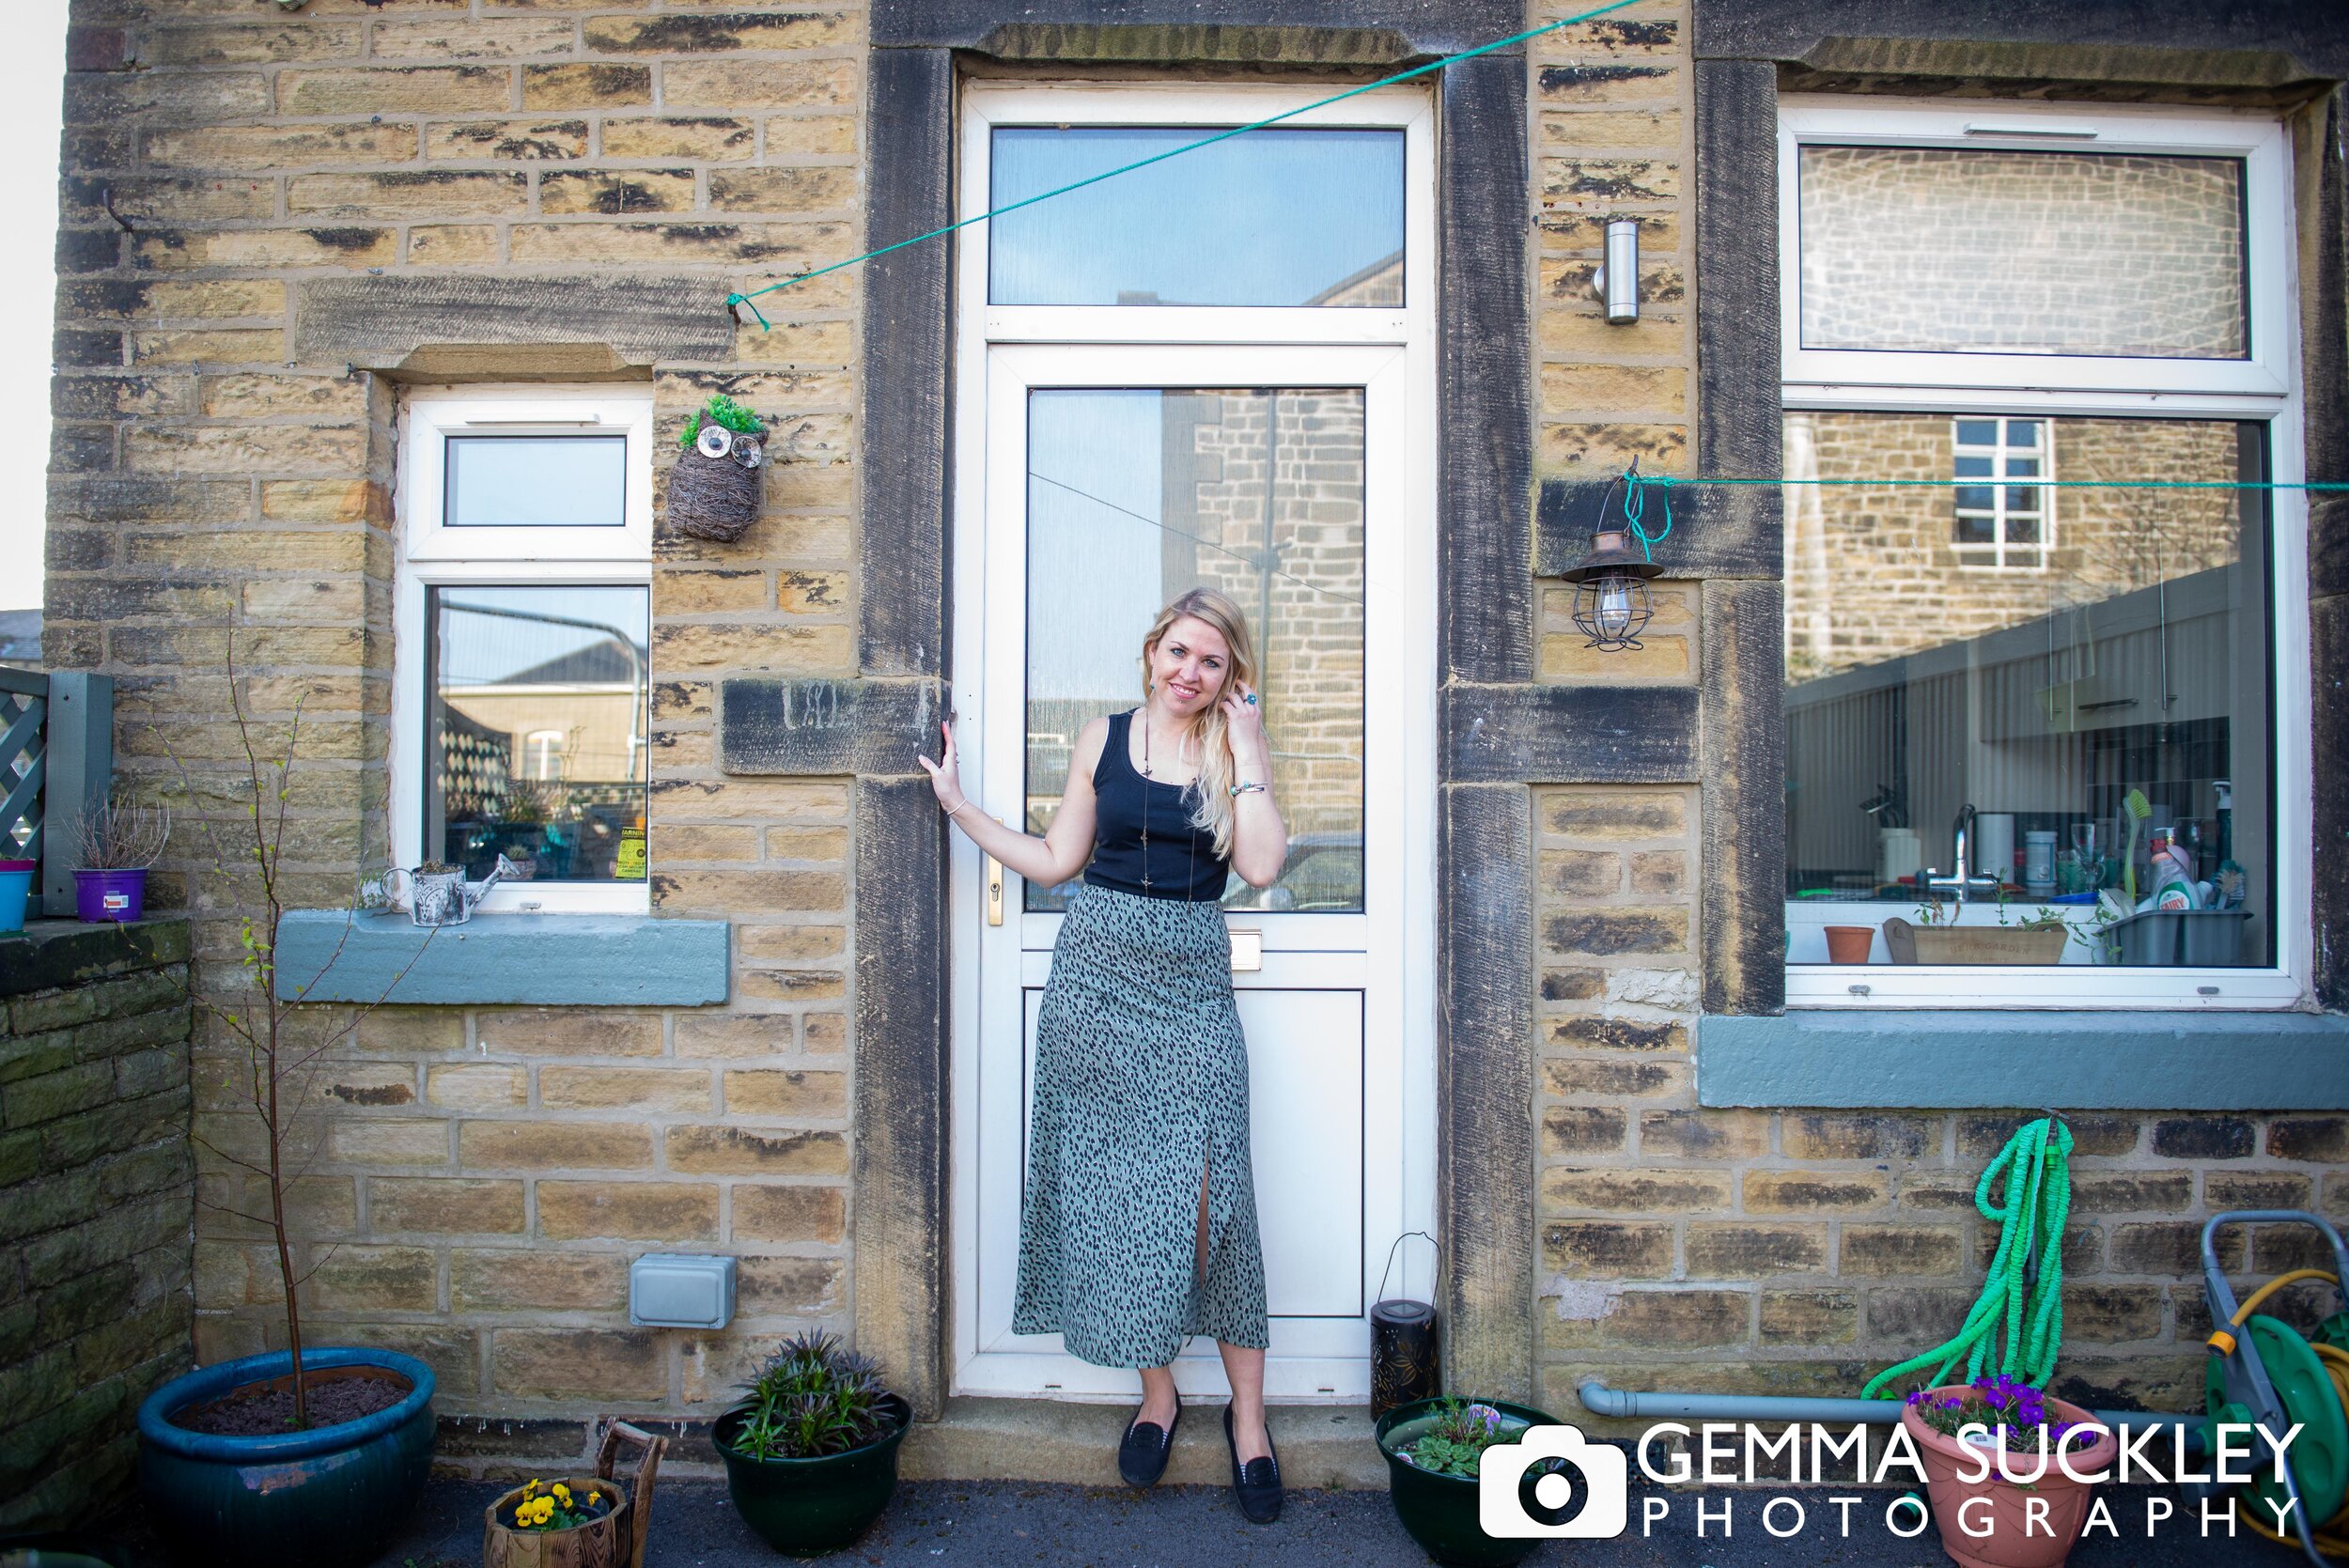 A young woman standing on her doorstep smiling